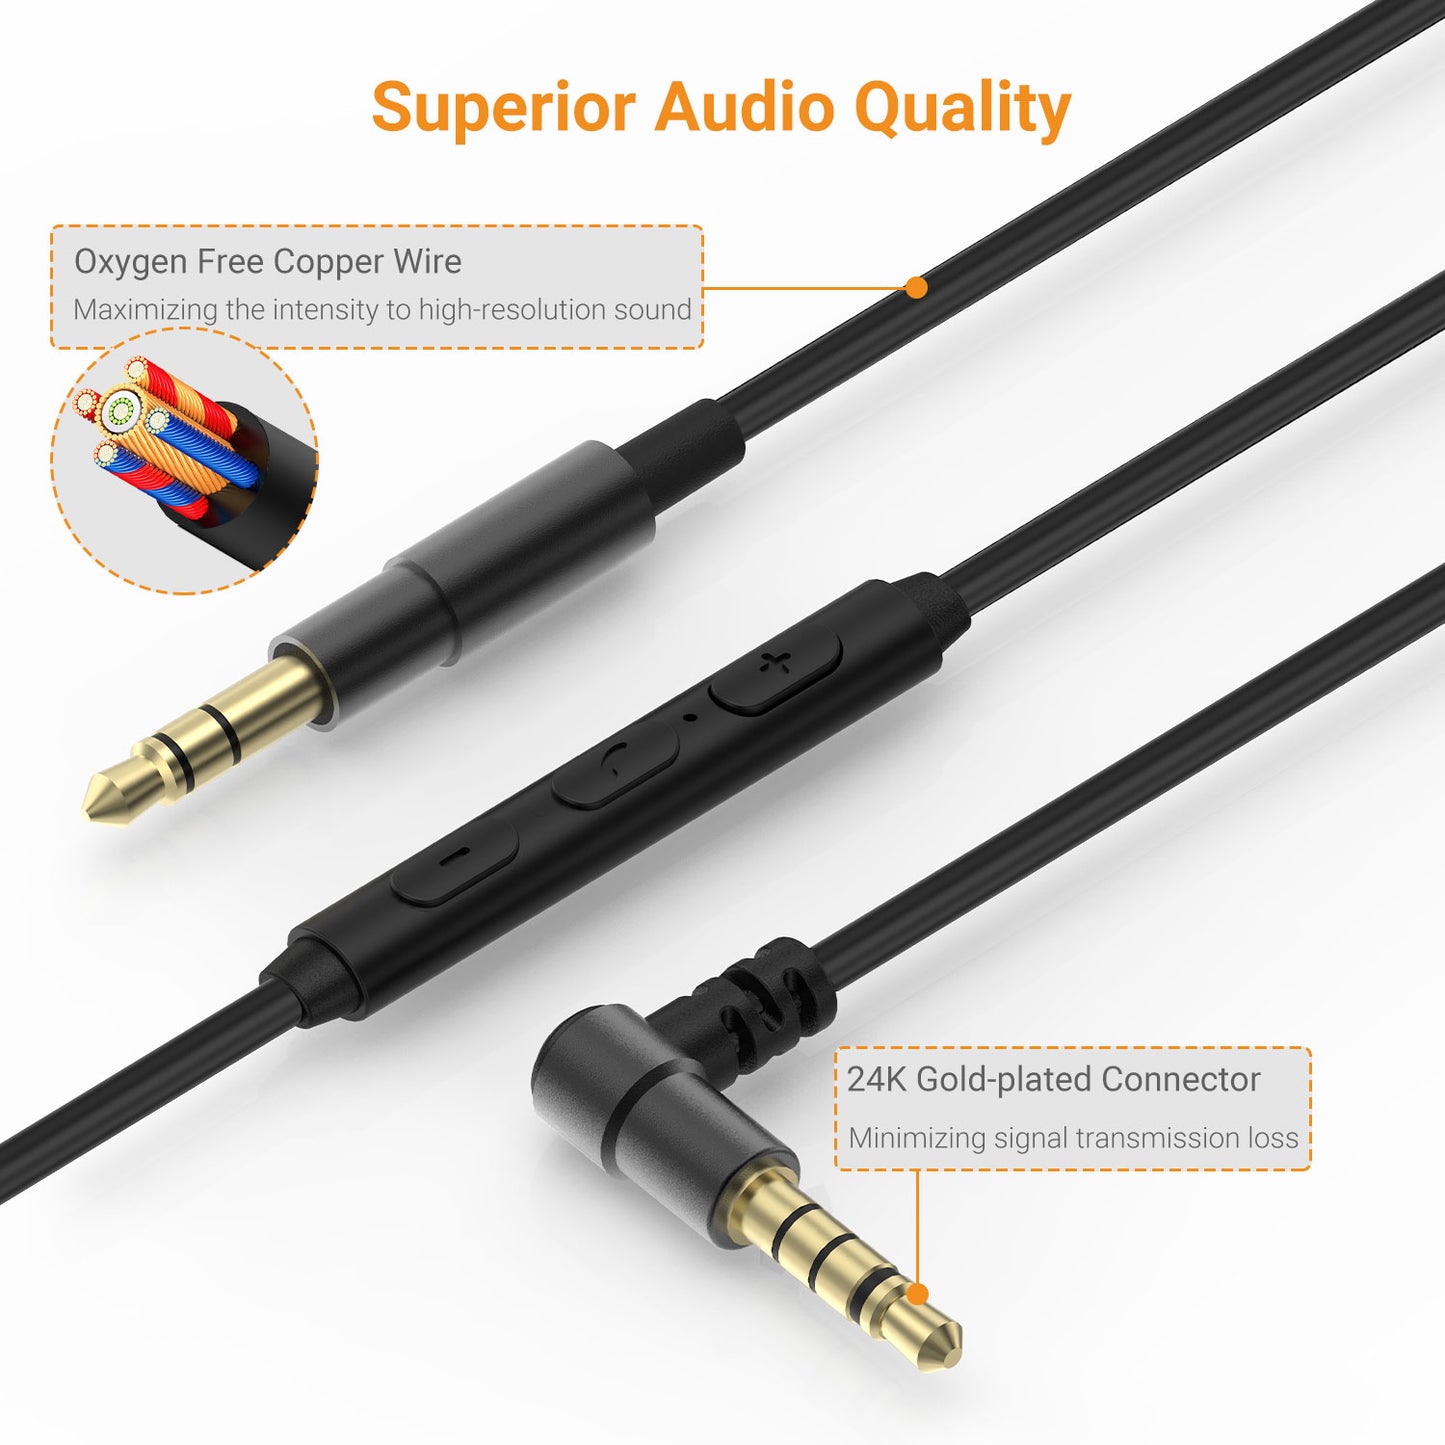 Right-Angled 3.5mm to 3.5mm Headphone Replacement Cable-Black,6FT